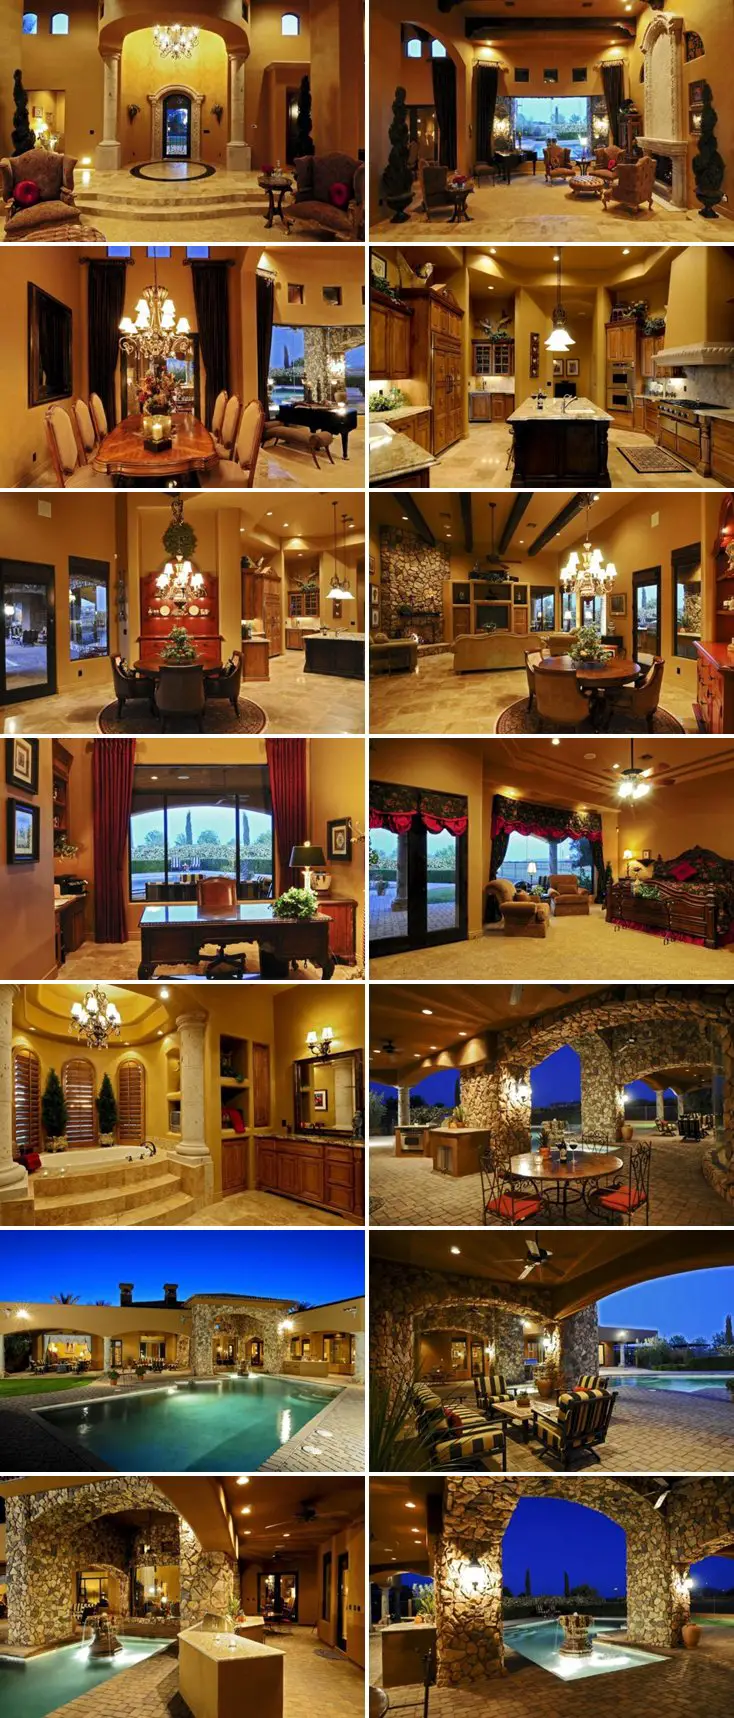 Andre Ethier house pictures